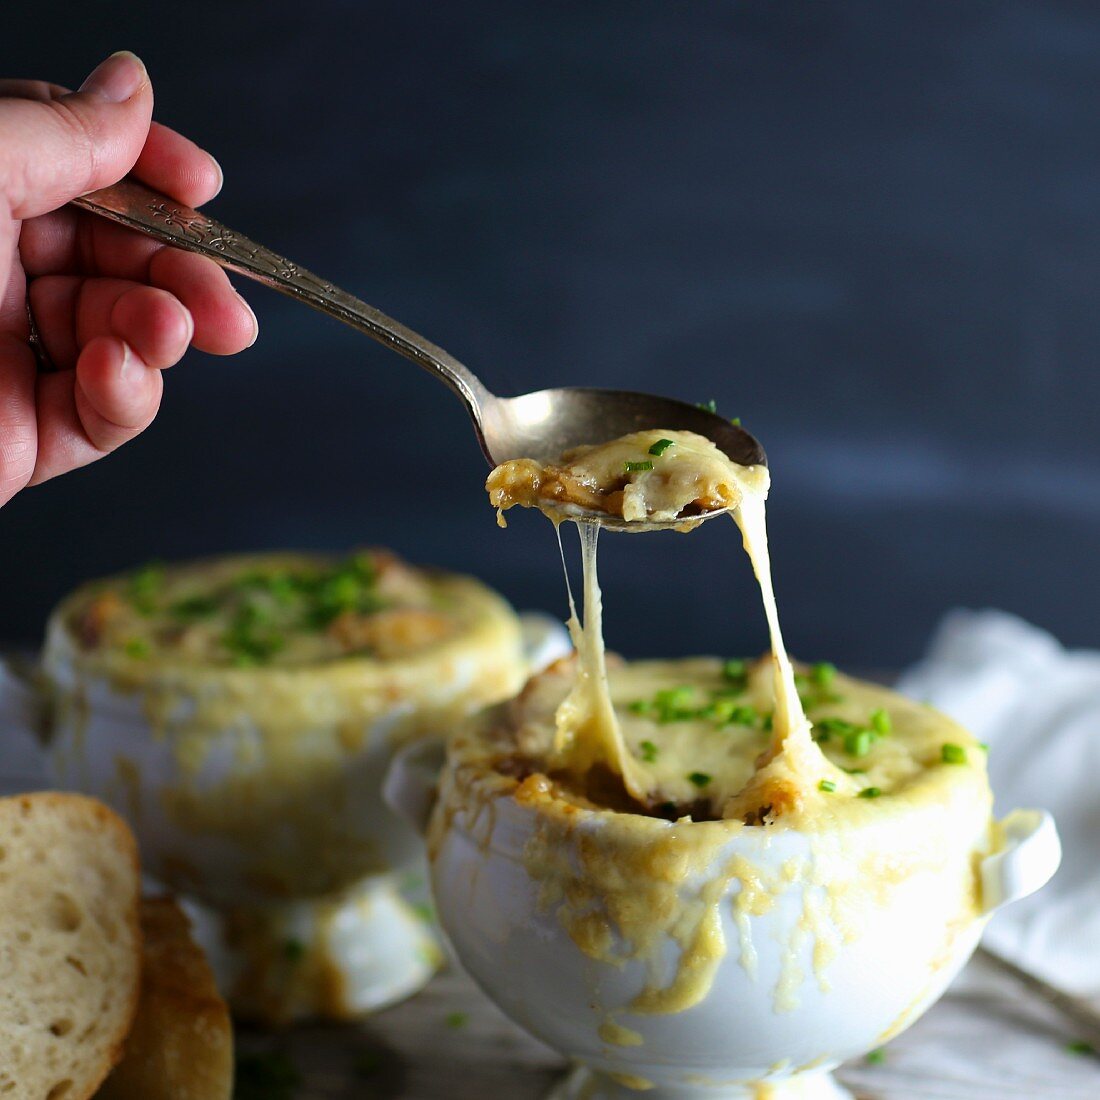 A person eating gratinated onion soup